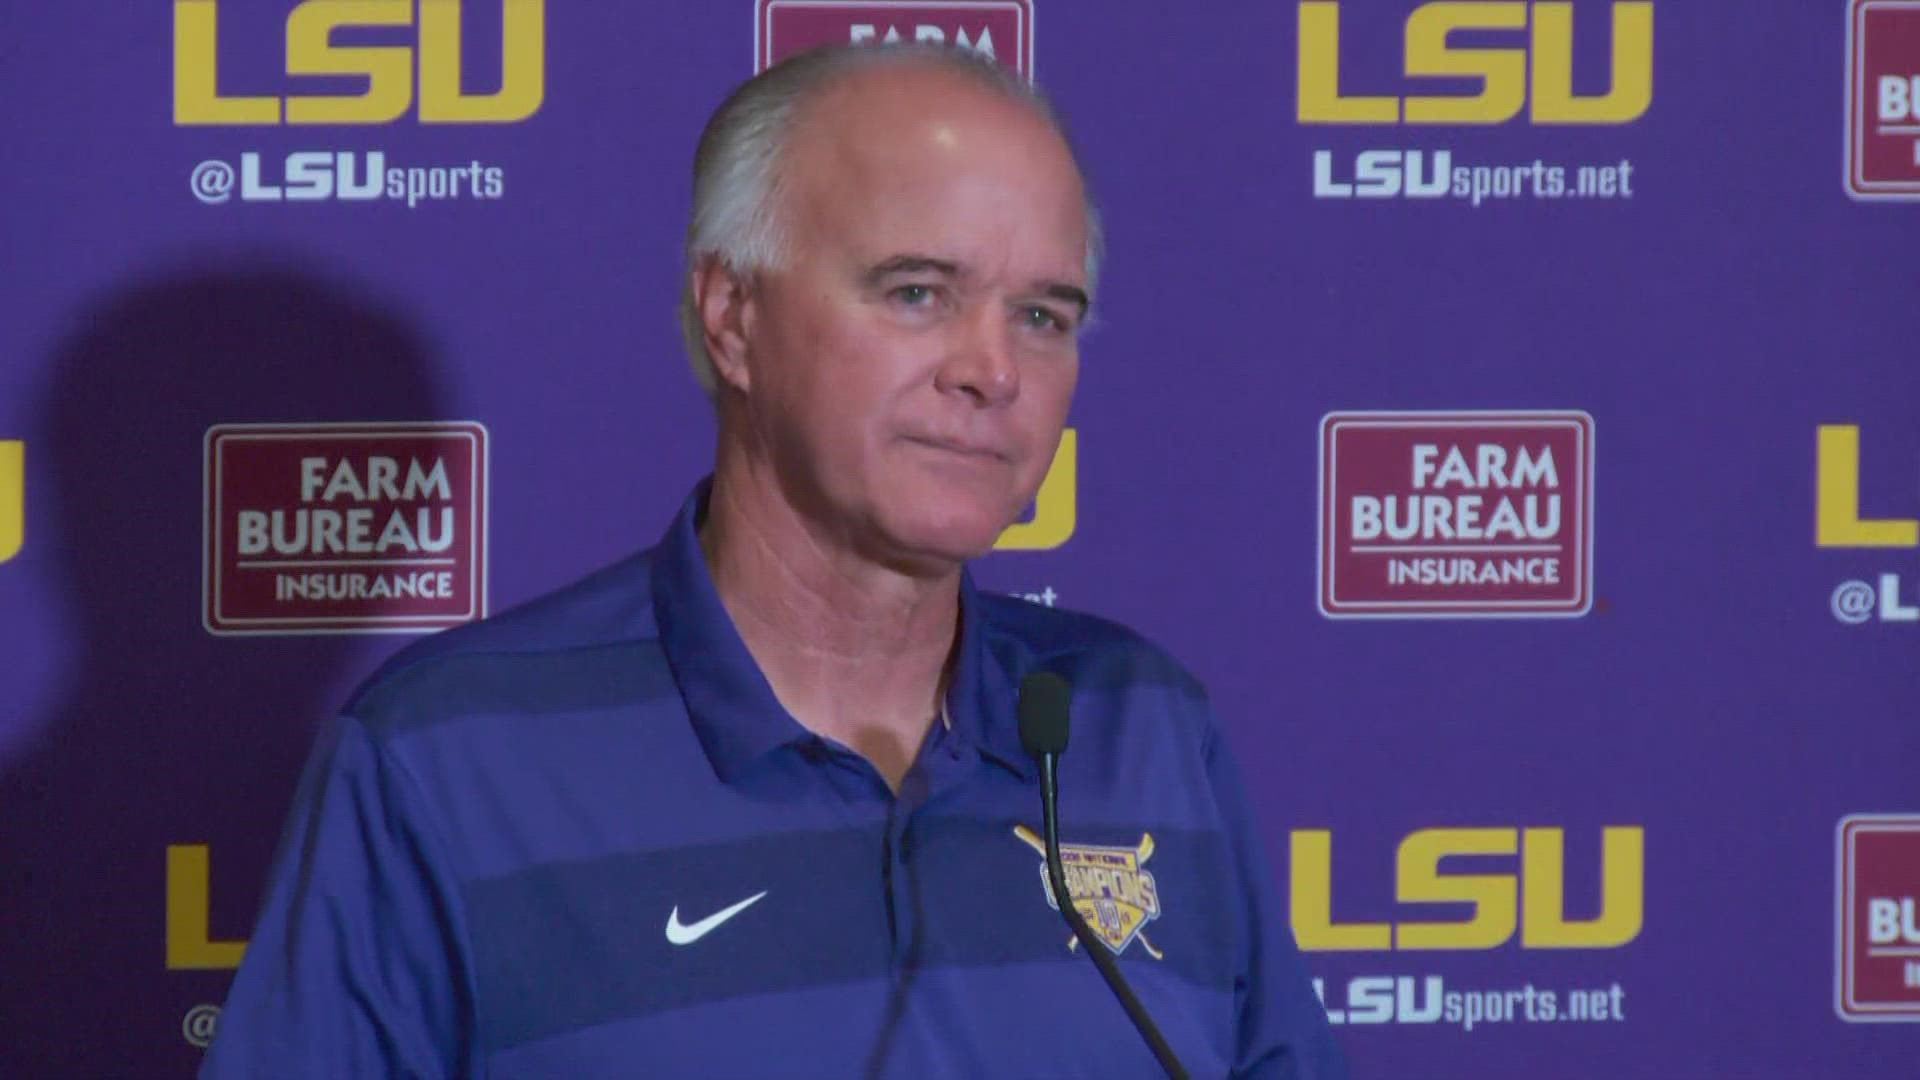 Coach Mainieri led the LSU Tigers for 15 years.